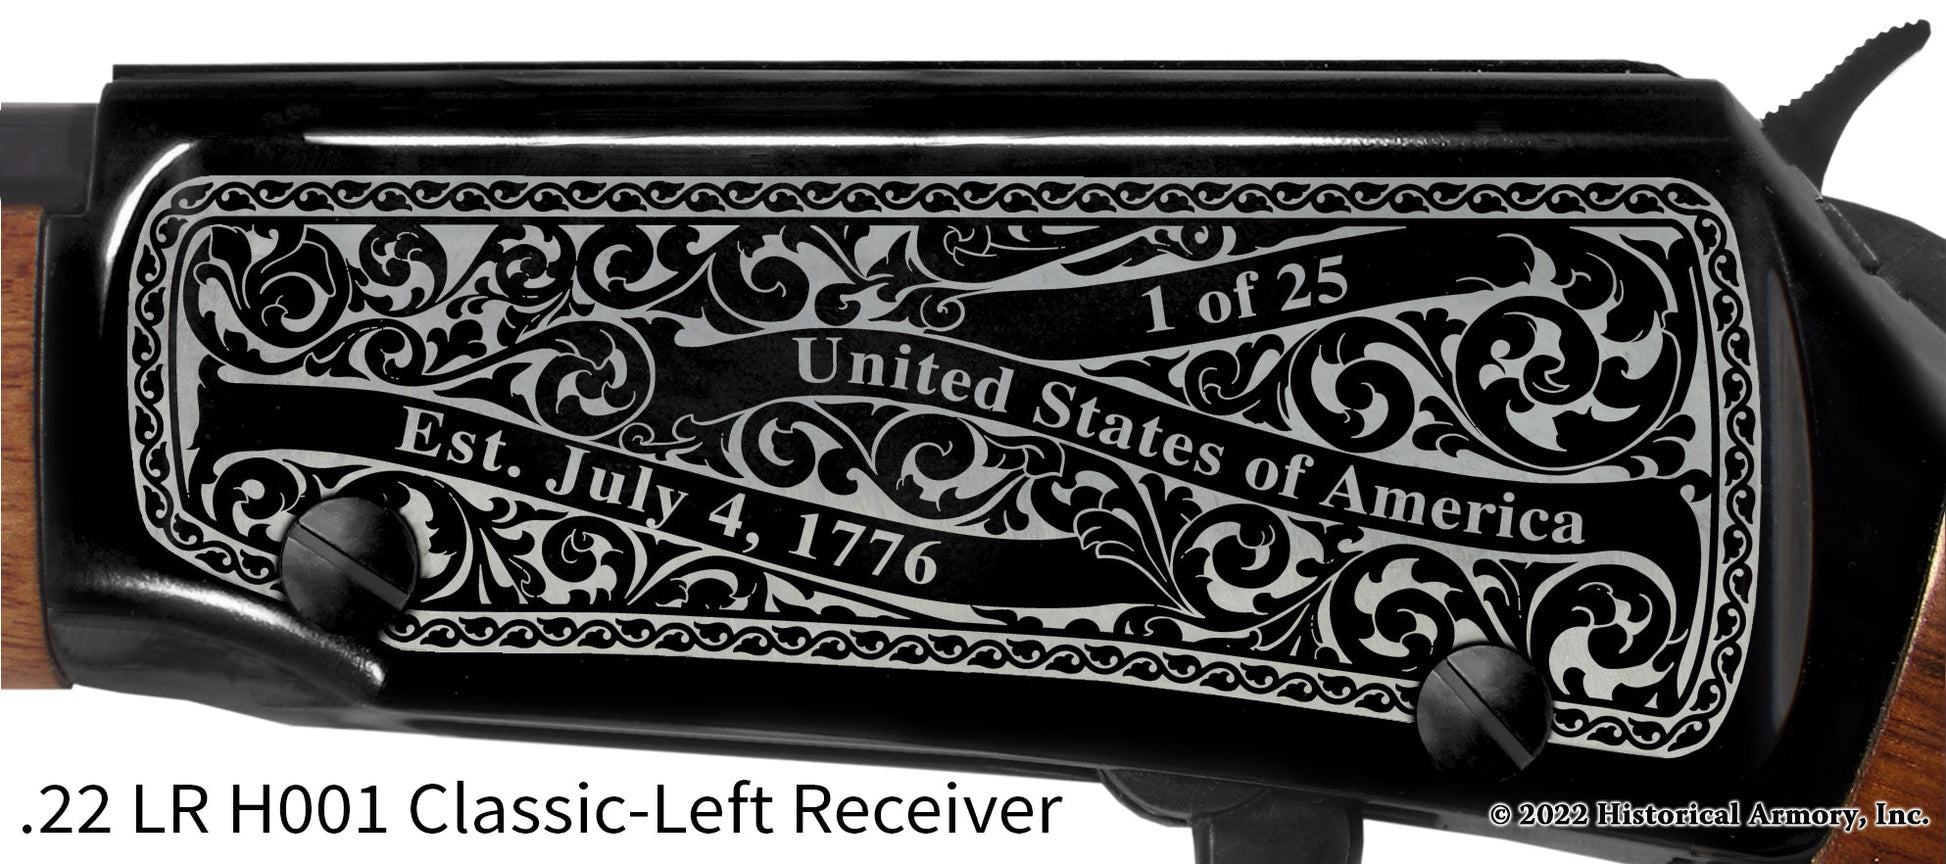 Madison County Mississippi Engraved Henry H001 Rifle